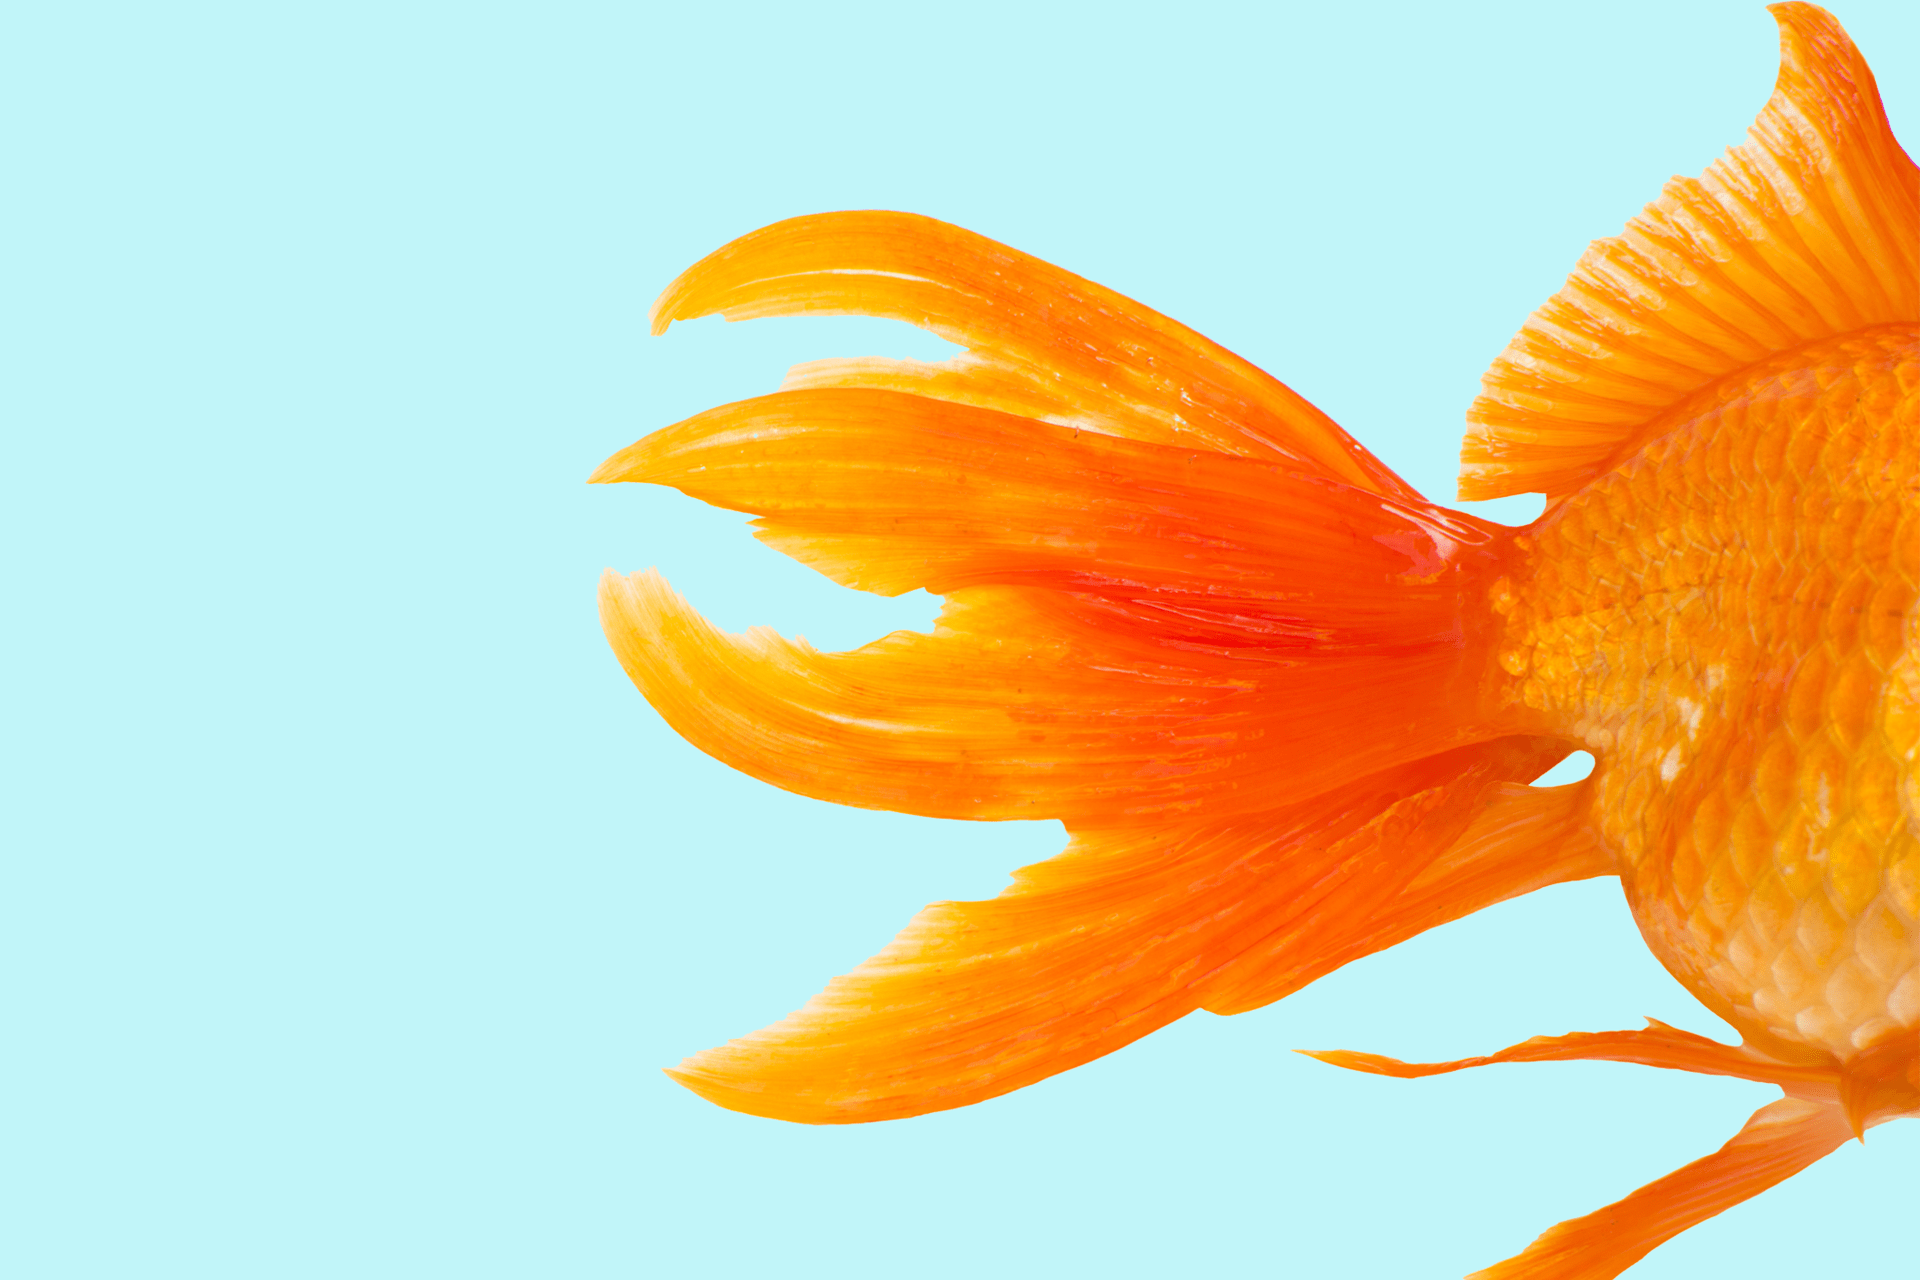 Tail end of a goldfish